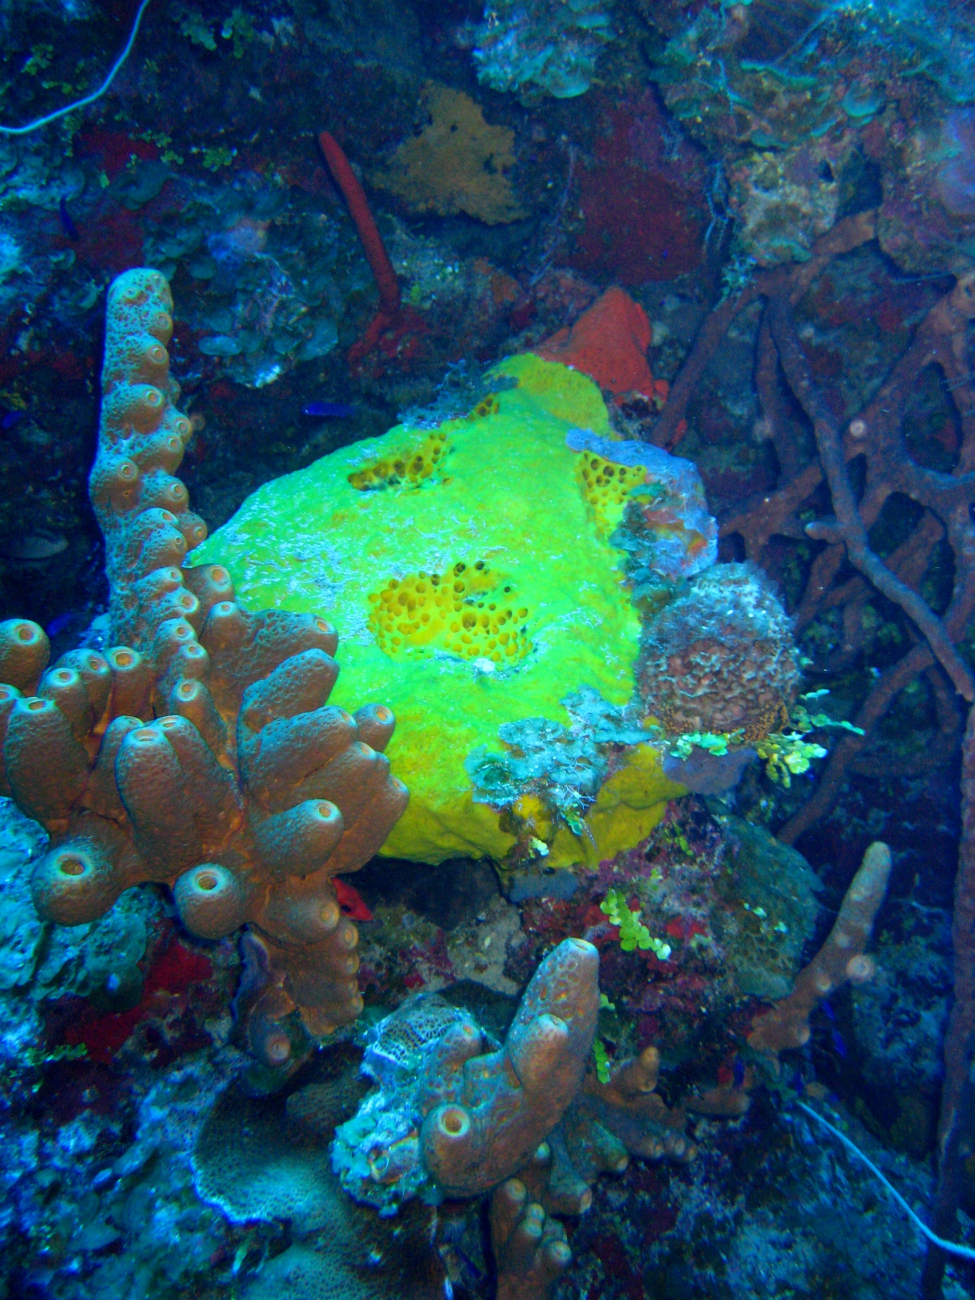 Multiple multi-colored sponges dominate this view as algae appears to bebecoming more sparse